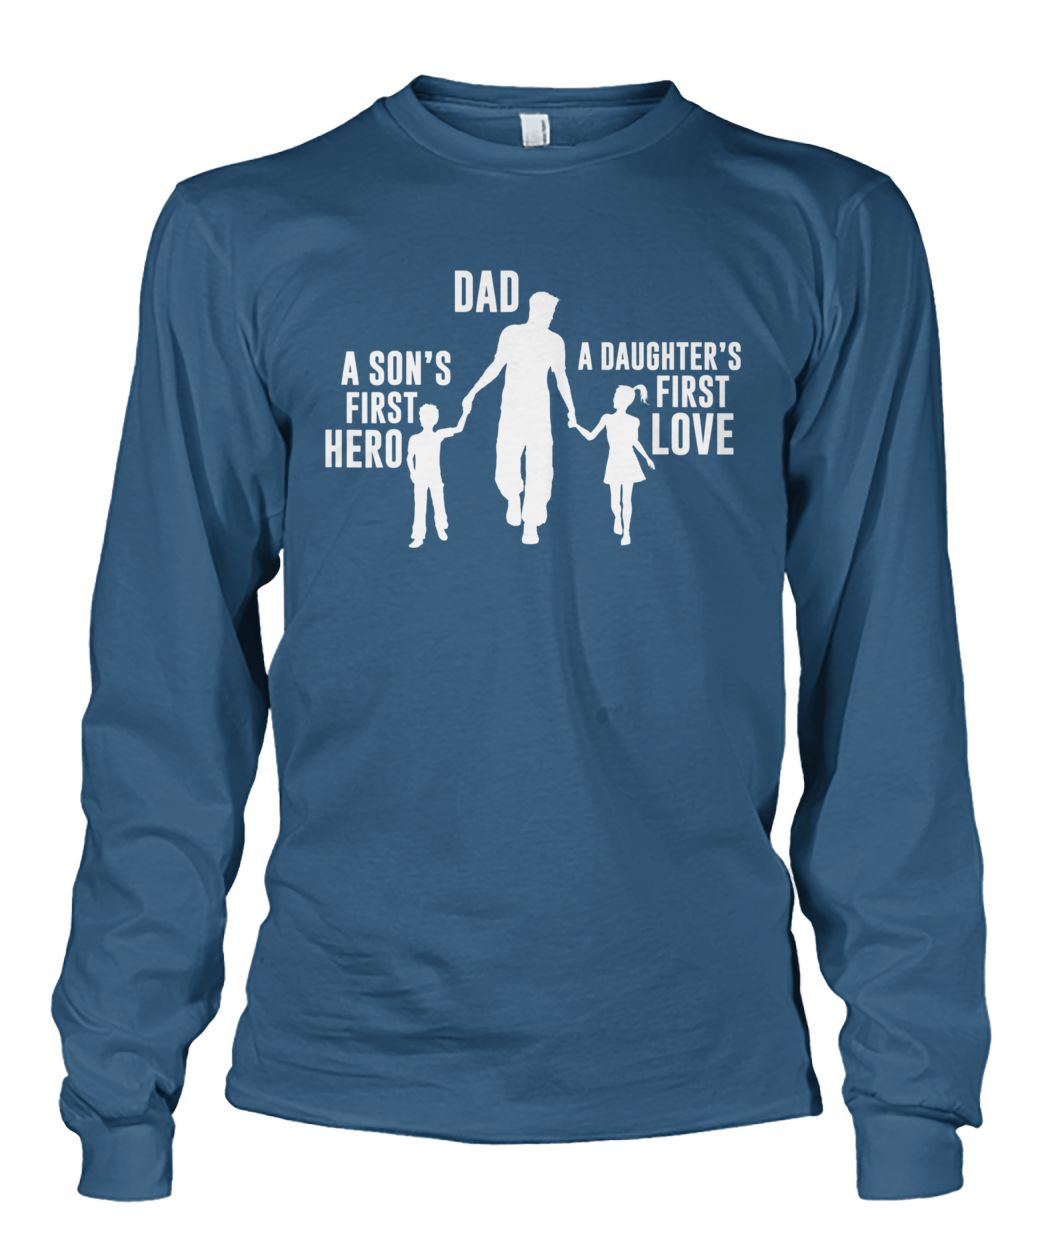 Dad a son's first hero a daughter's first love unisex long sleeve